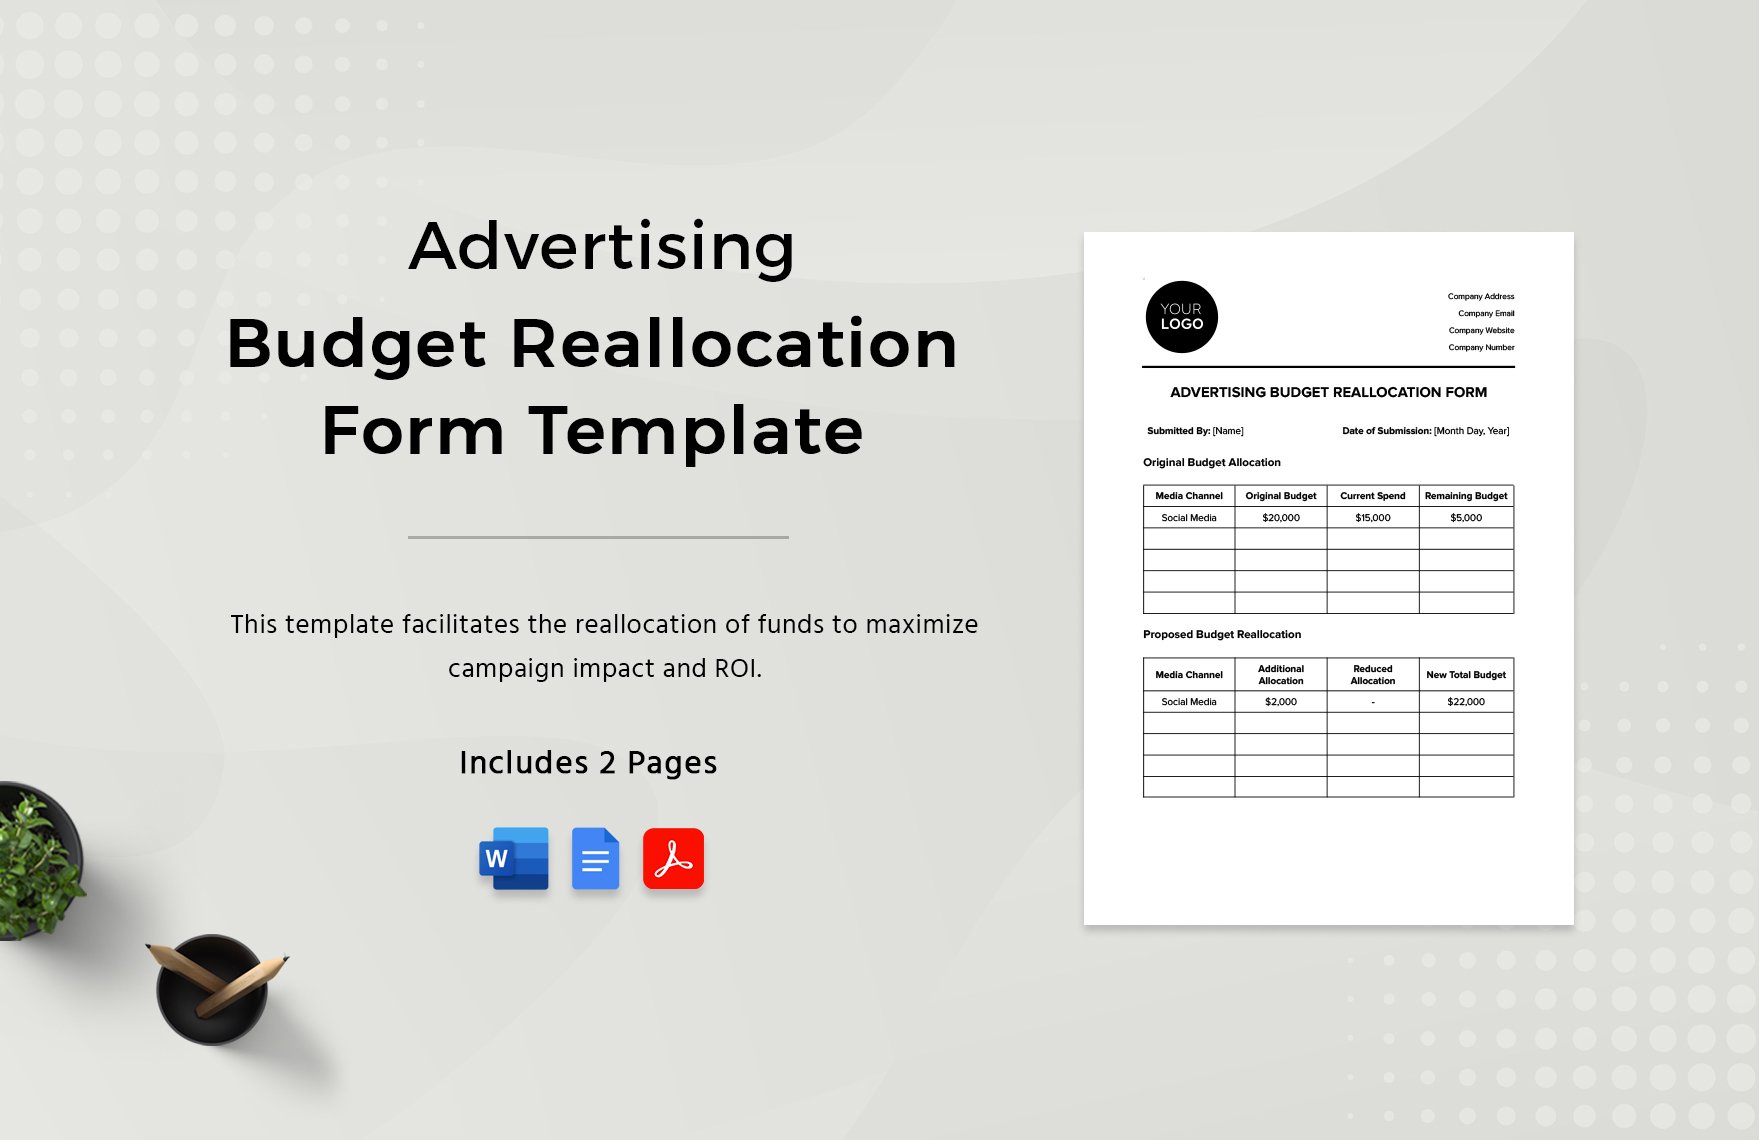 Advertising Budget Reallocation Form Template